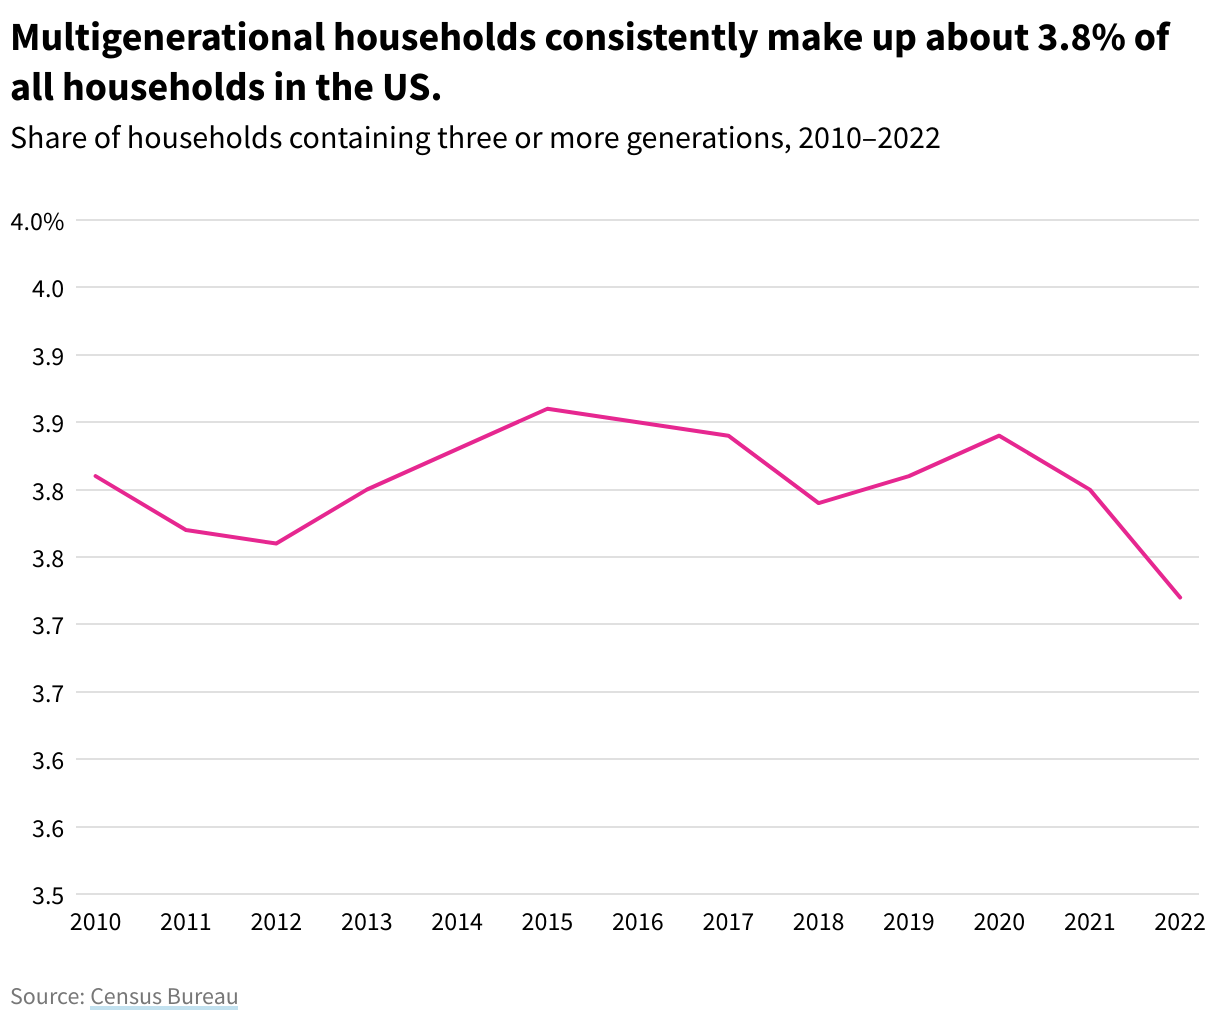 A line chart showing multigenerational households divided by total households, 2010-2022. Multigenerational households consistently make up about 3.8% of all households in the US